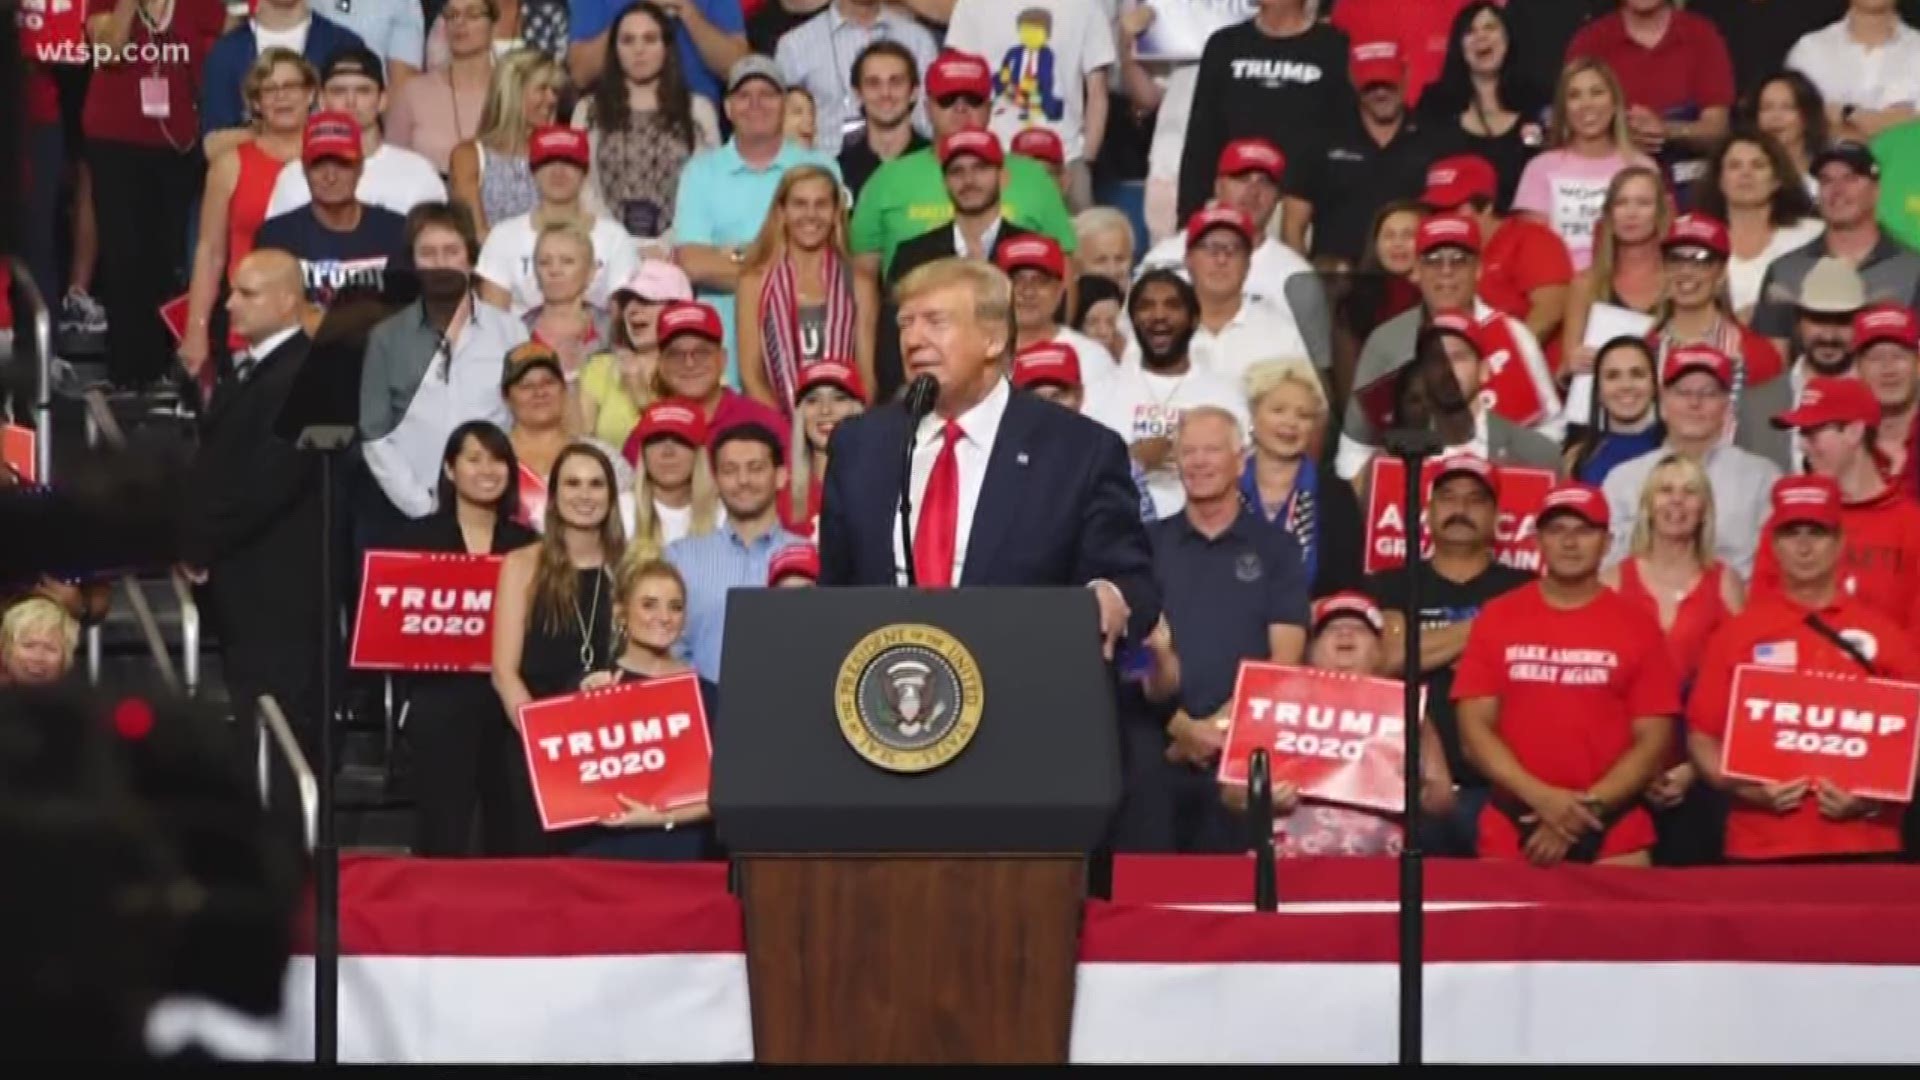 Addressing a crowd of thousands at the Amway Center in Orlando, Florida, President Trump complained he had been "under assault from the very first day" of his presidency by a "fake news media" and "illegal witch hunt" that had tried to keep him and his supporters down.